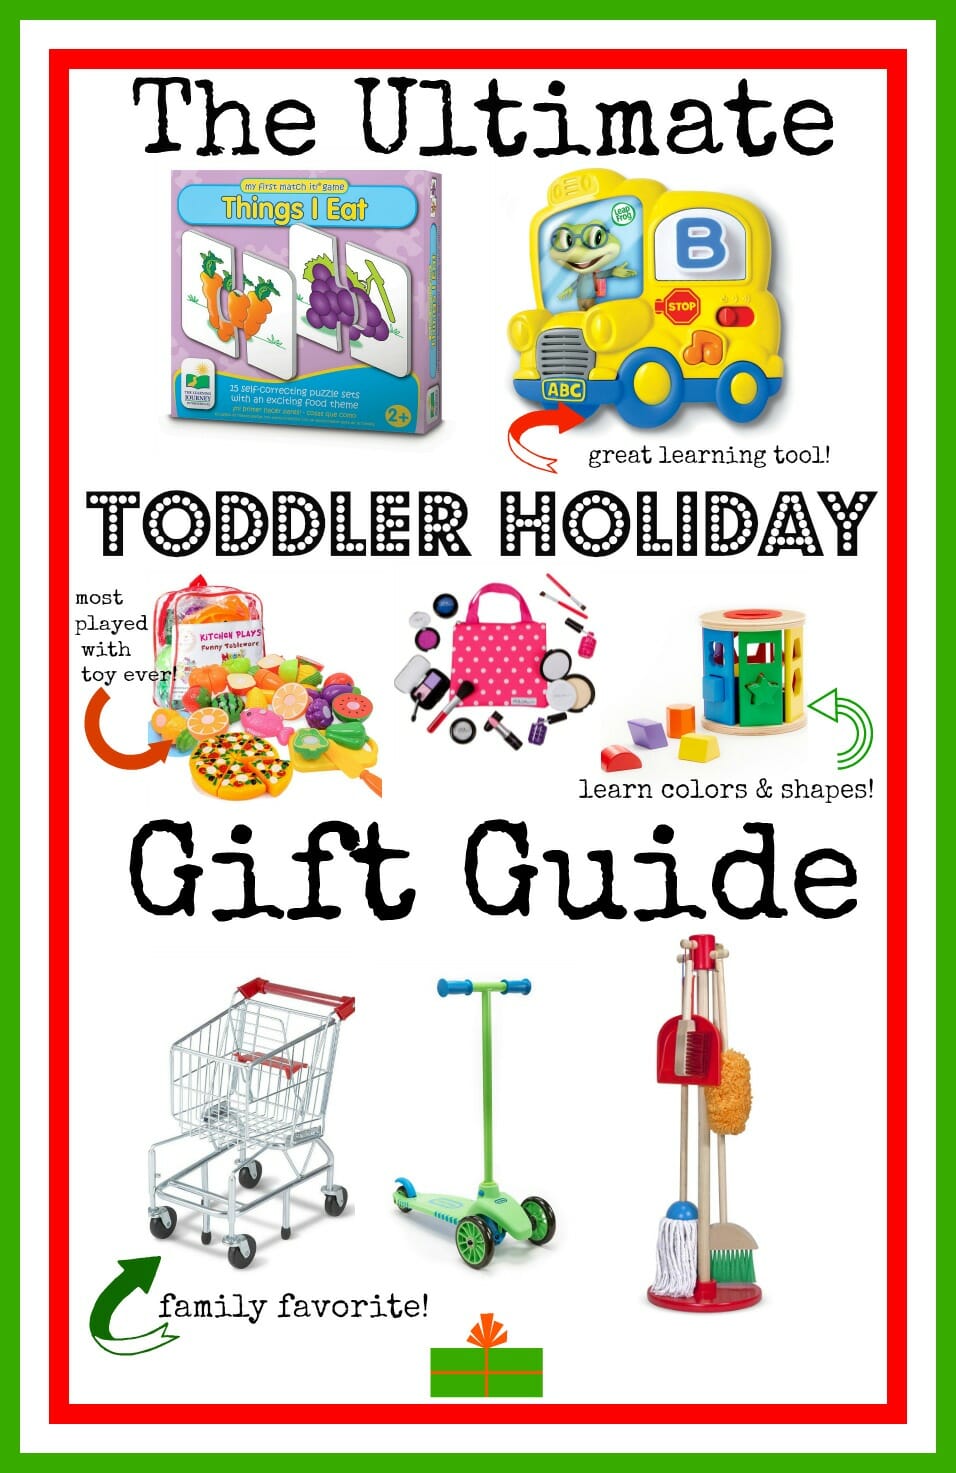 The Ultimate Toddler Holiday Gift Guide!